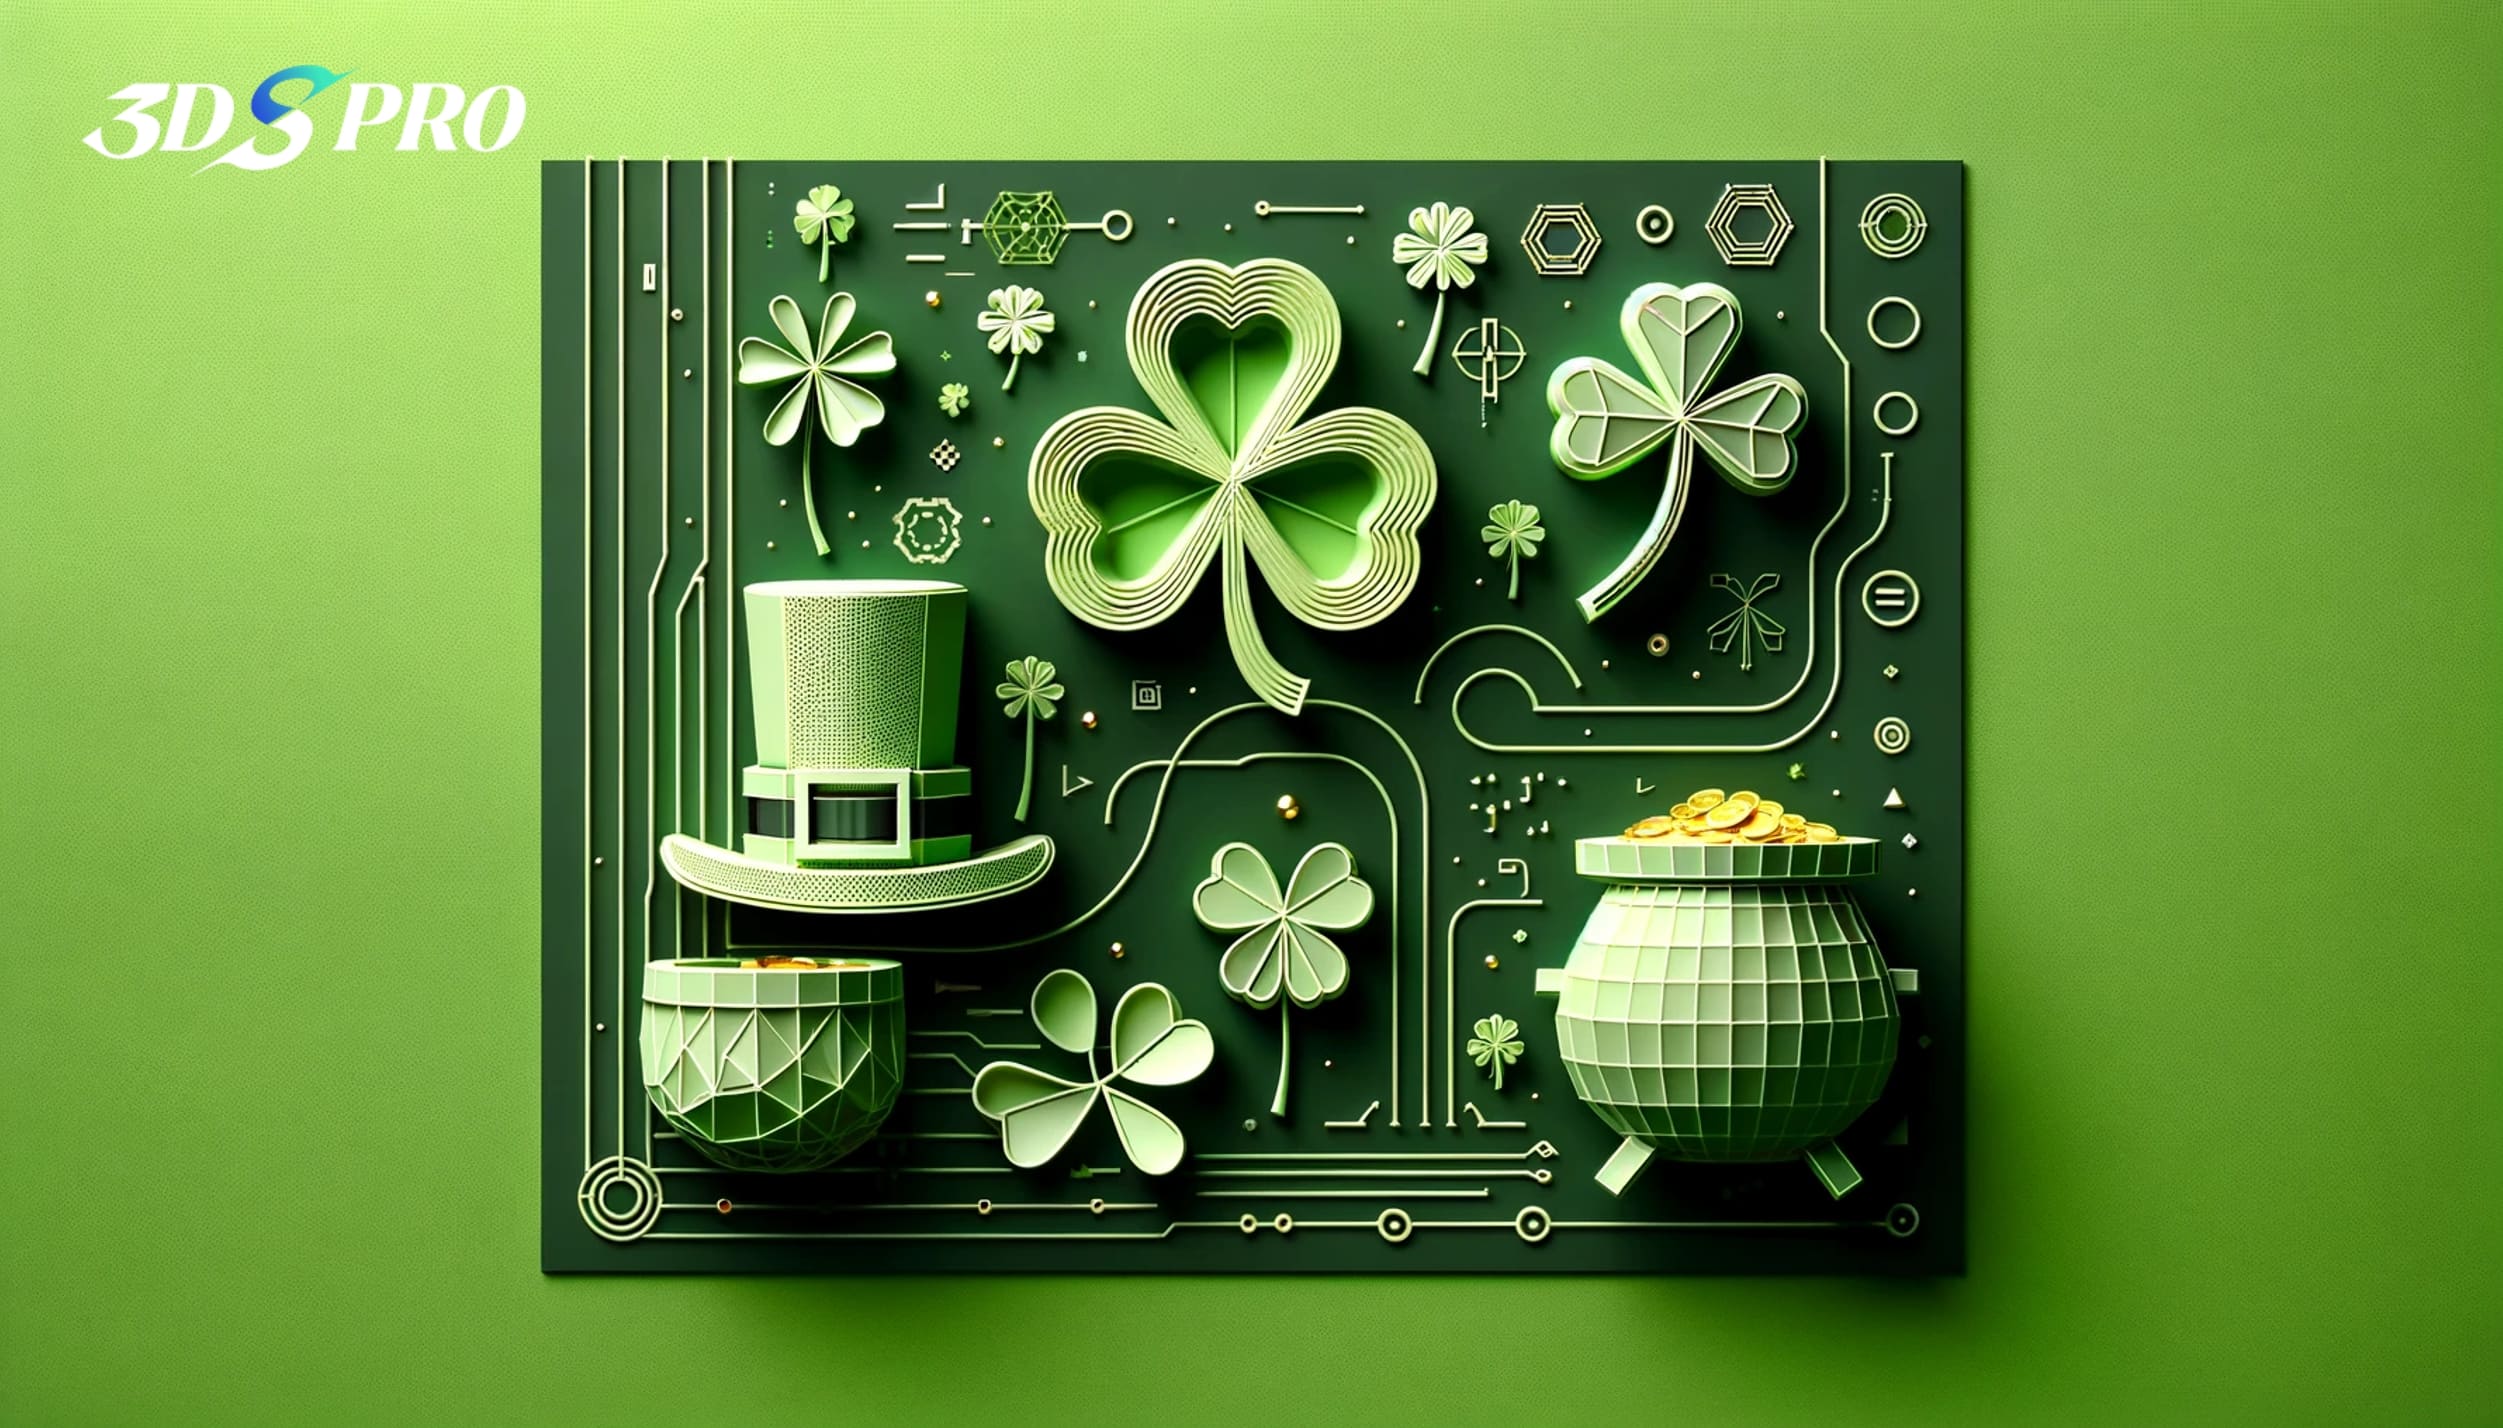 3D Printed St. Patrick’s Day Decorations at 3DSPRO